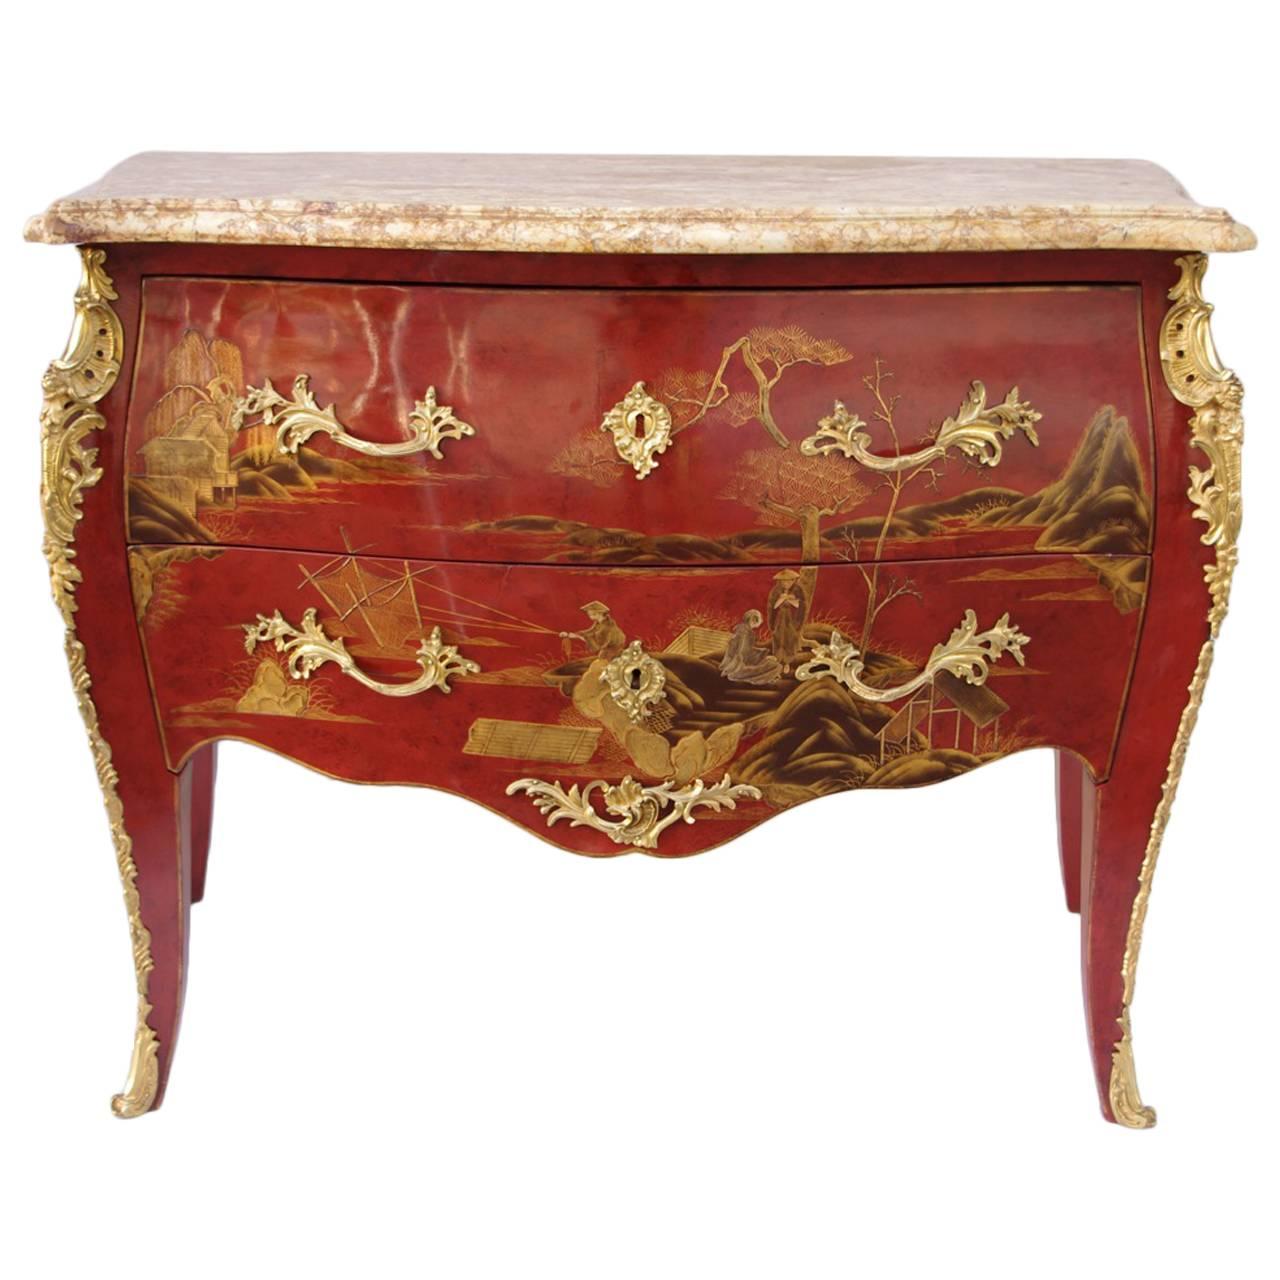 Sauteuse commode with Chinese decor, Louis XV style, circa 1950